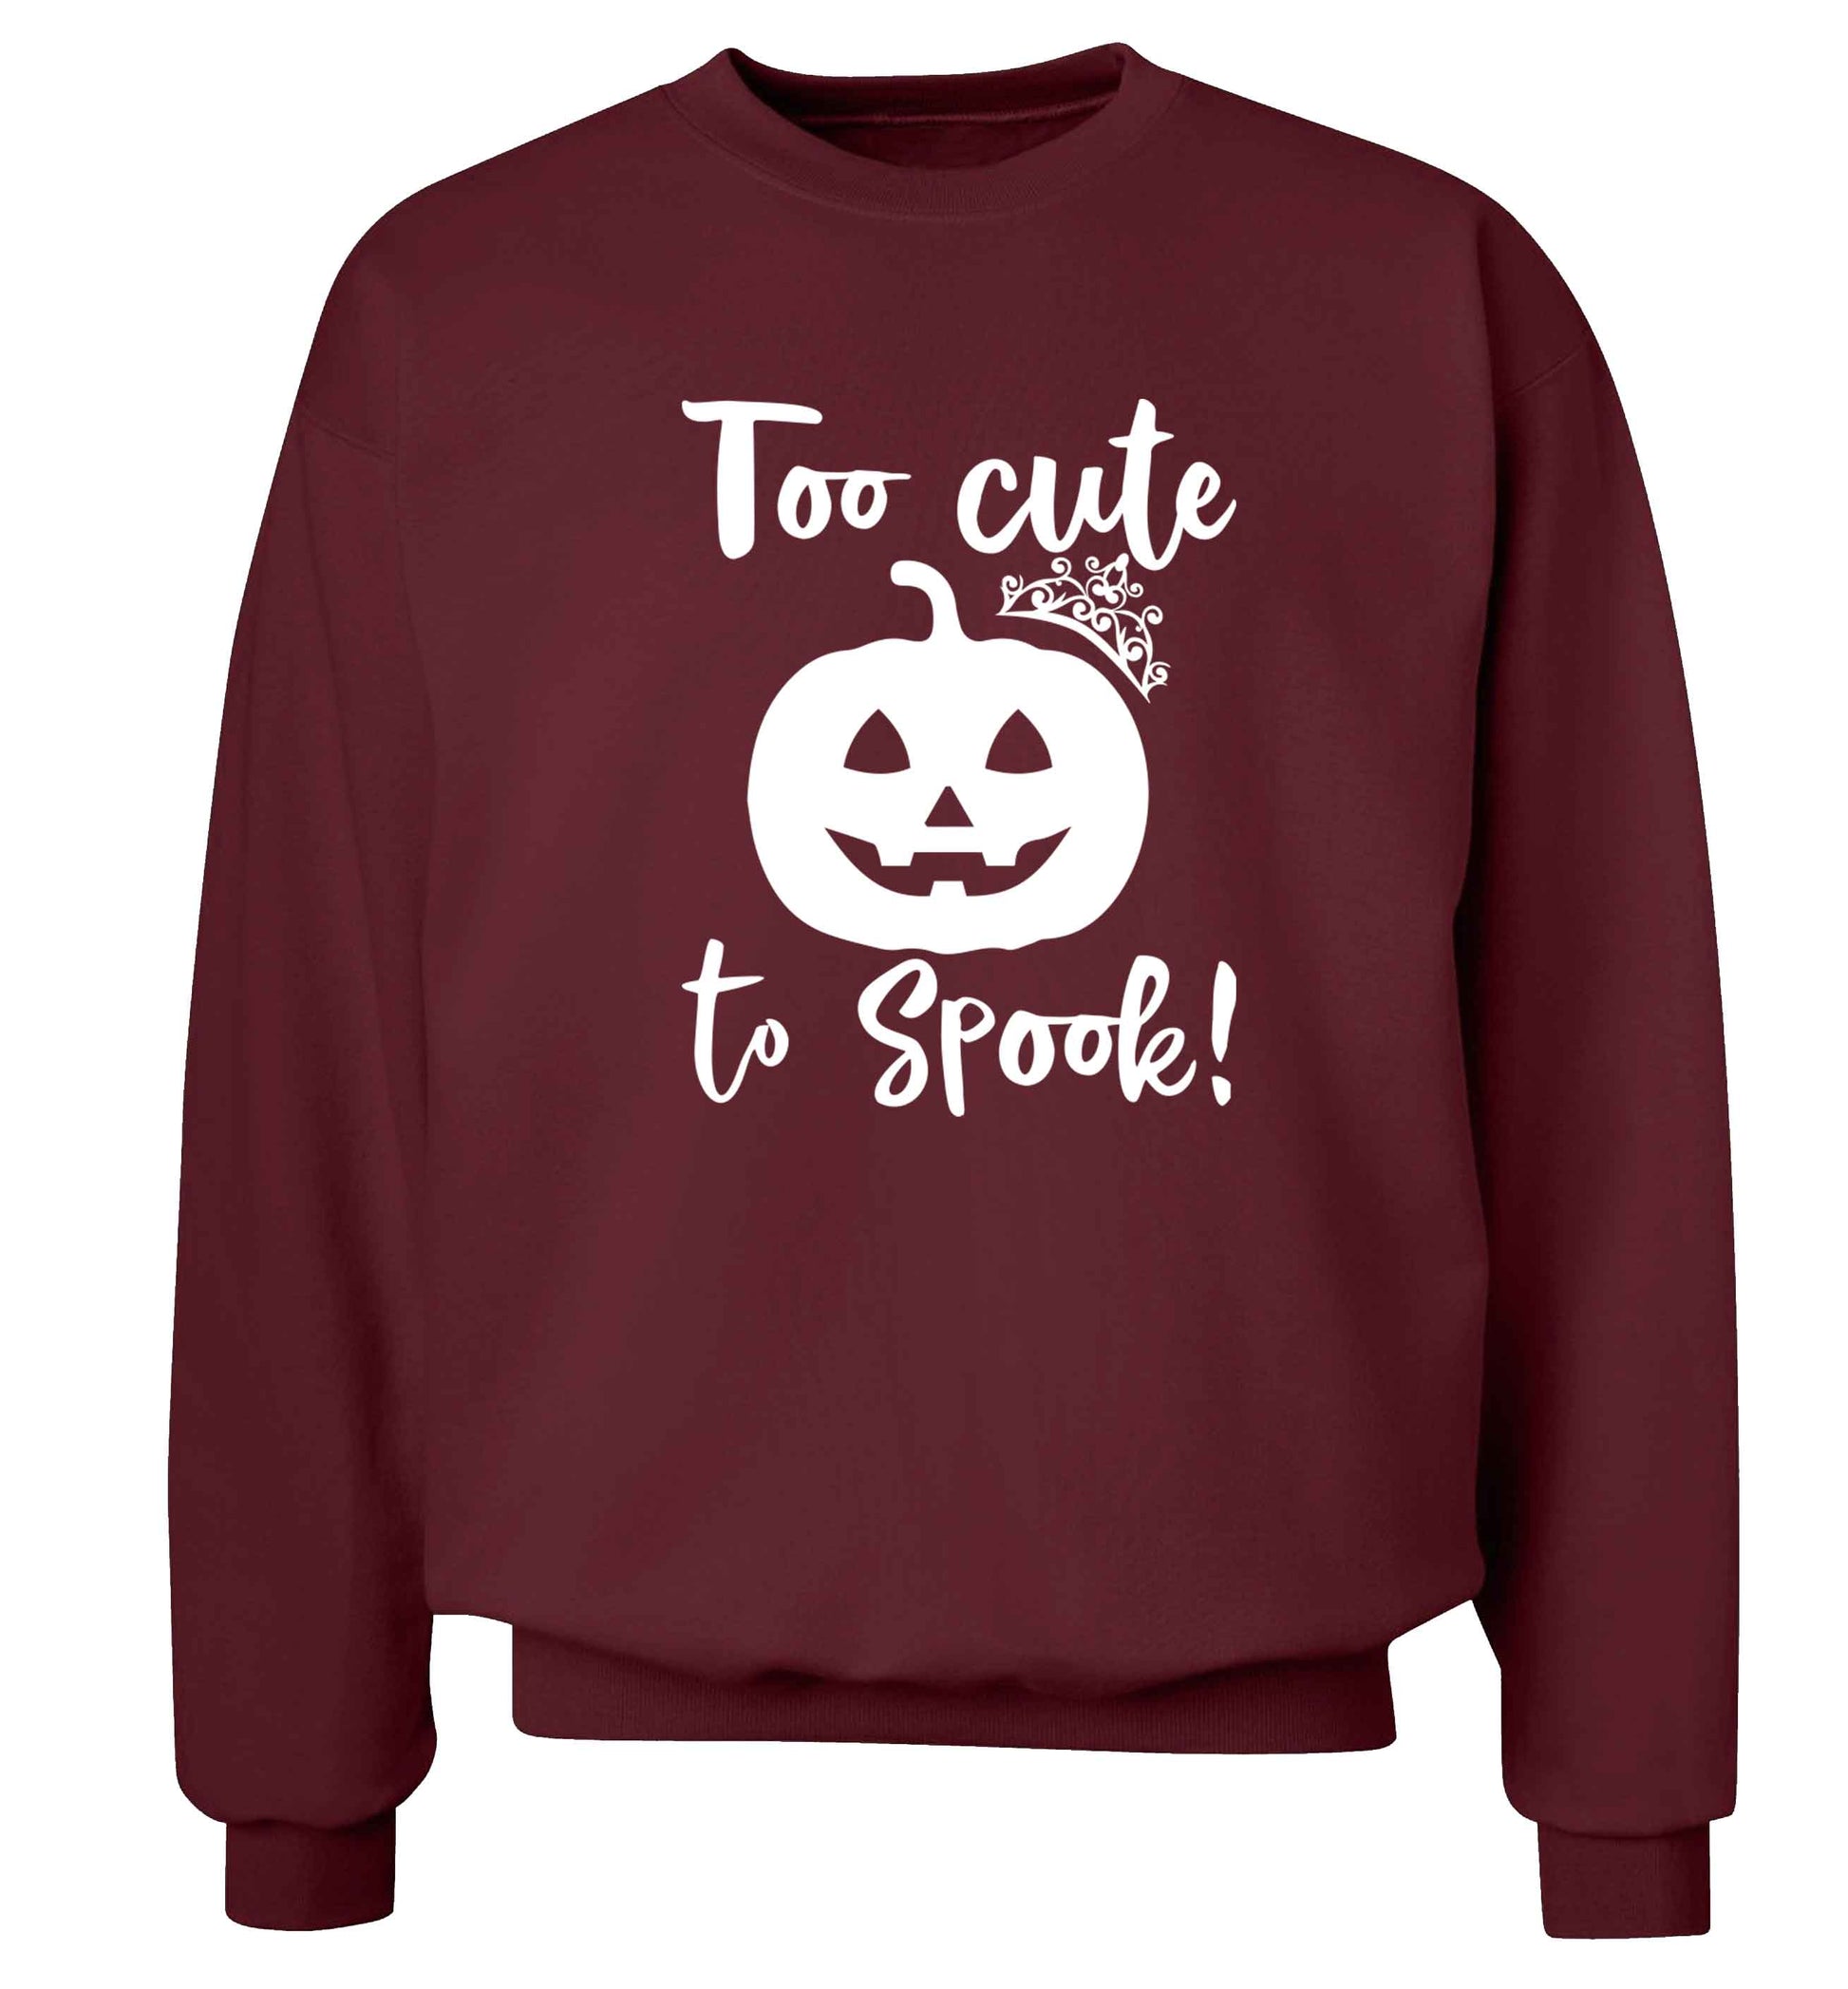 Too cute to spook! Adult's unisex maroon Sweater 2XL